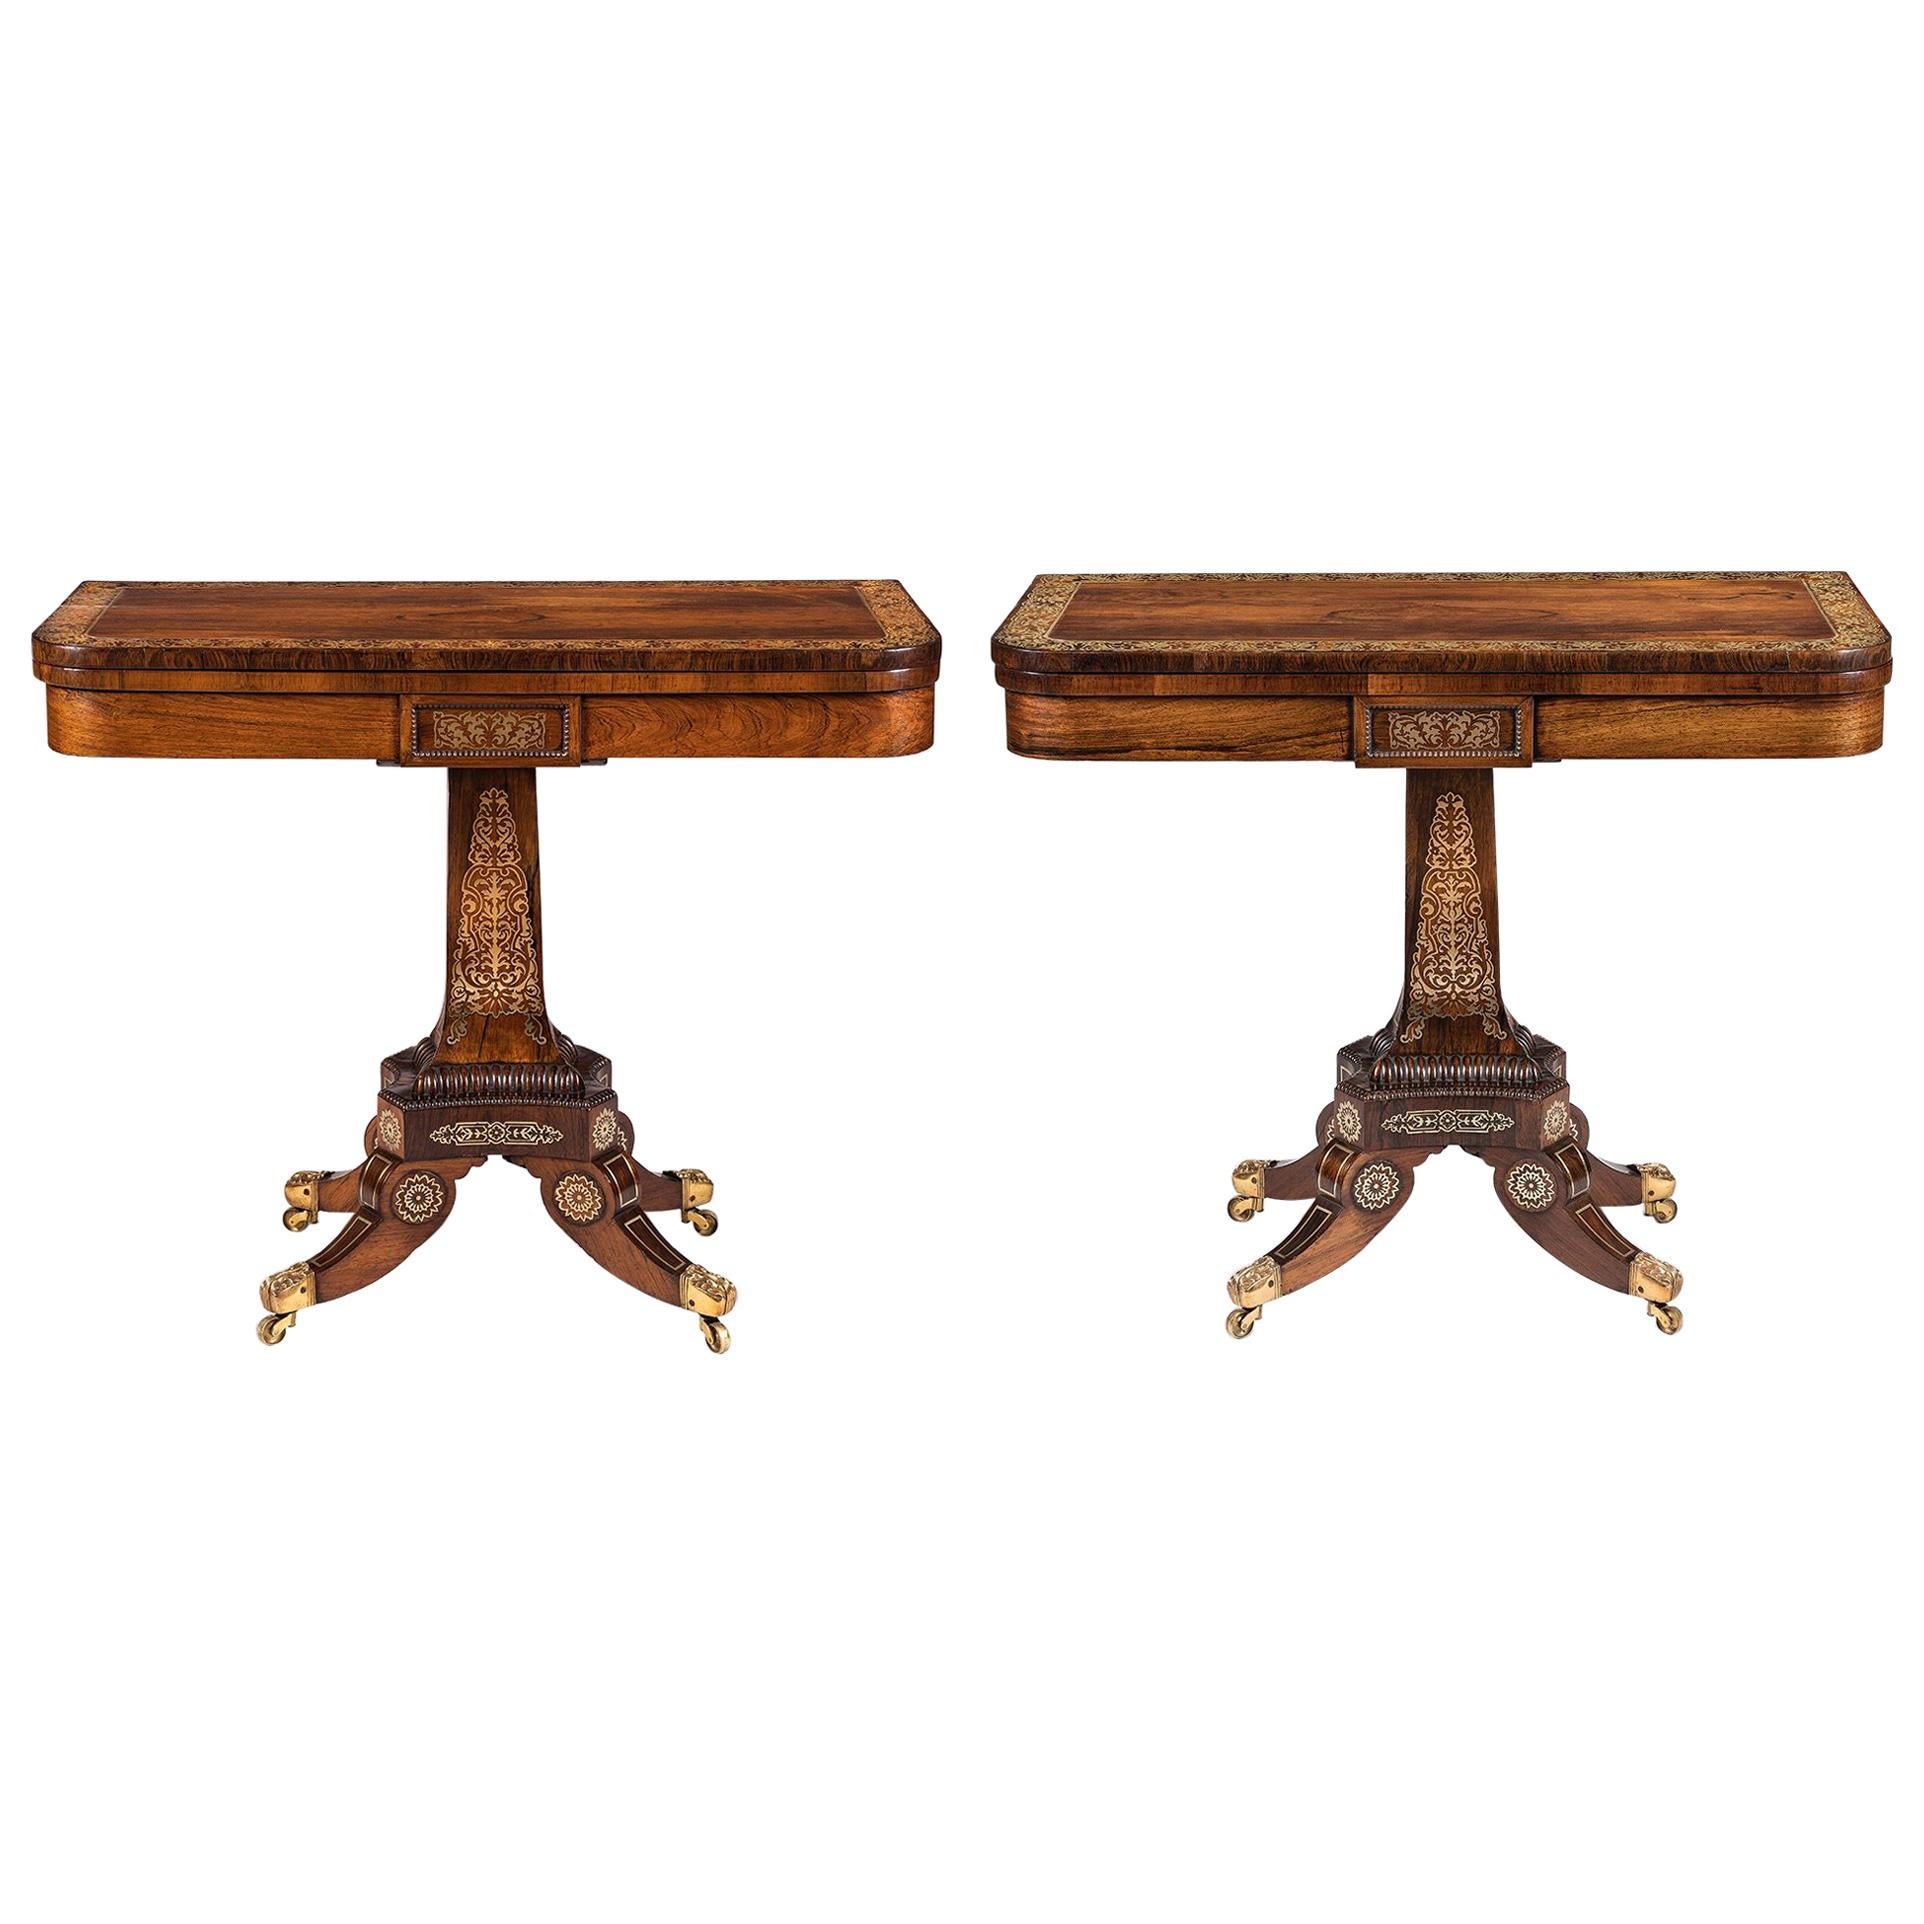 Pair of 19th Century English Regency Gonçalo Alves Card Tables with Brass Inlay For Sale